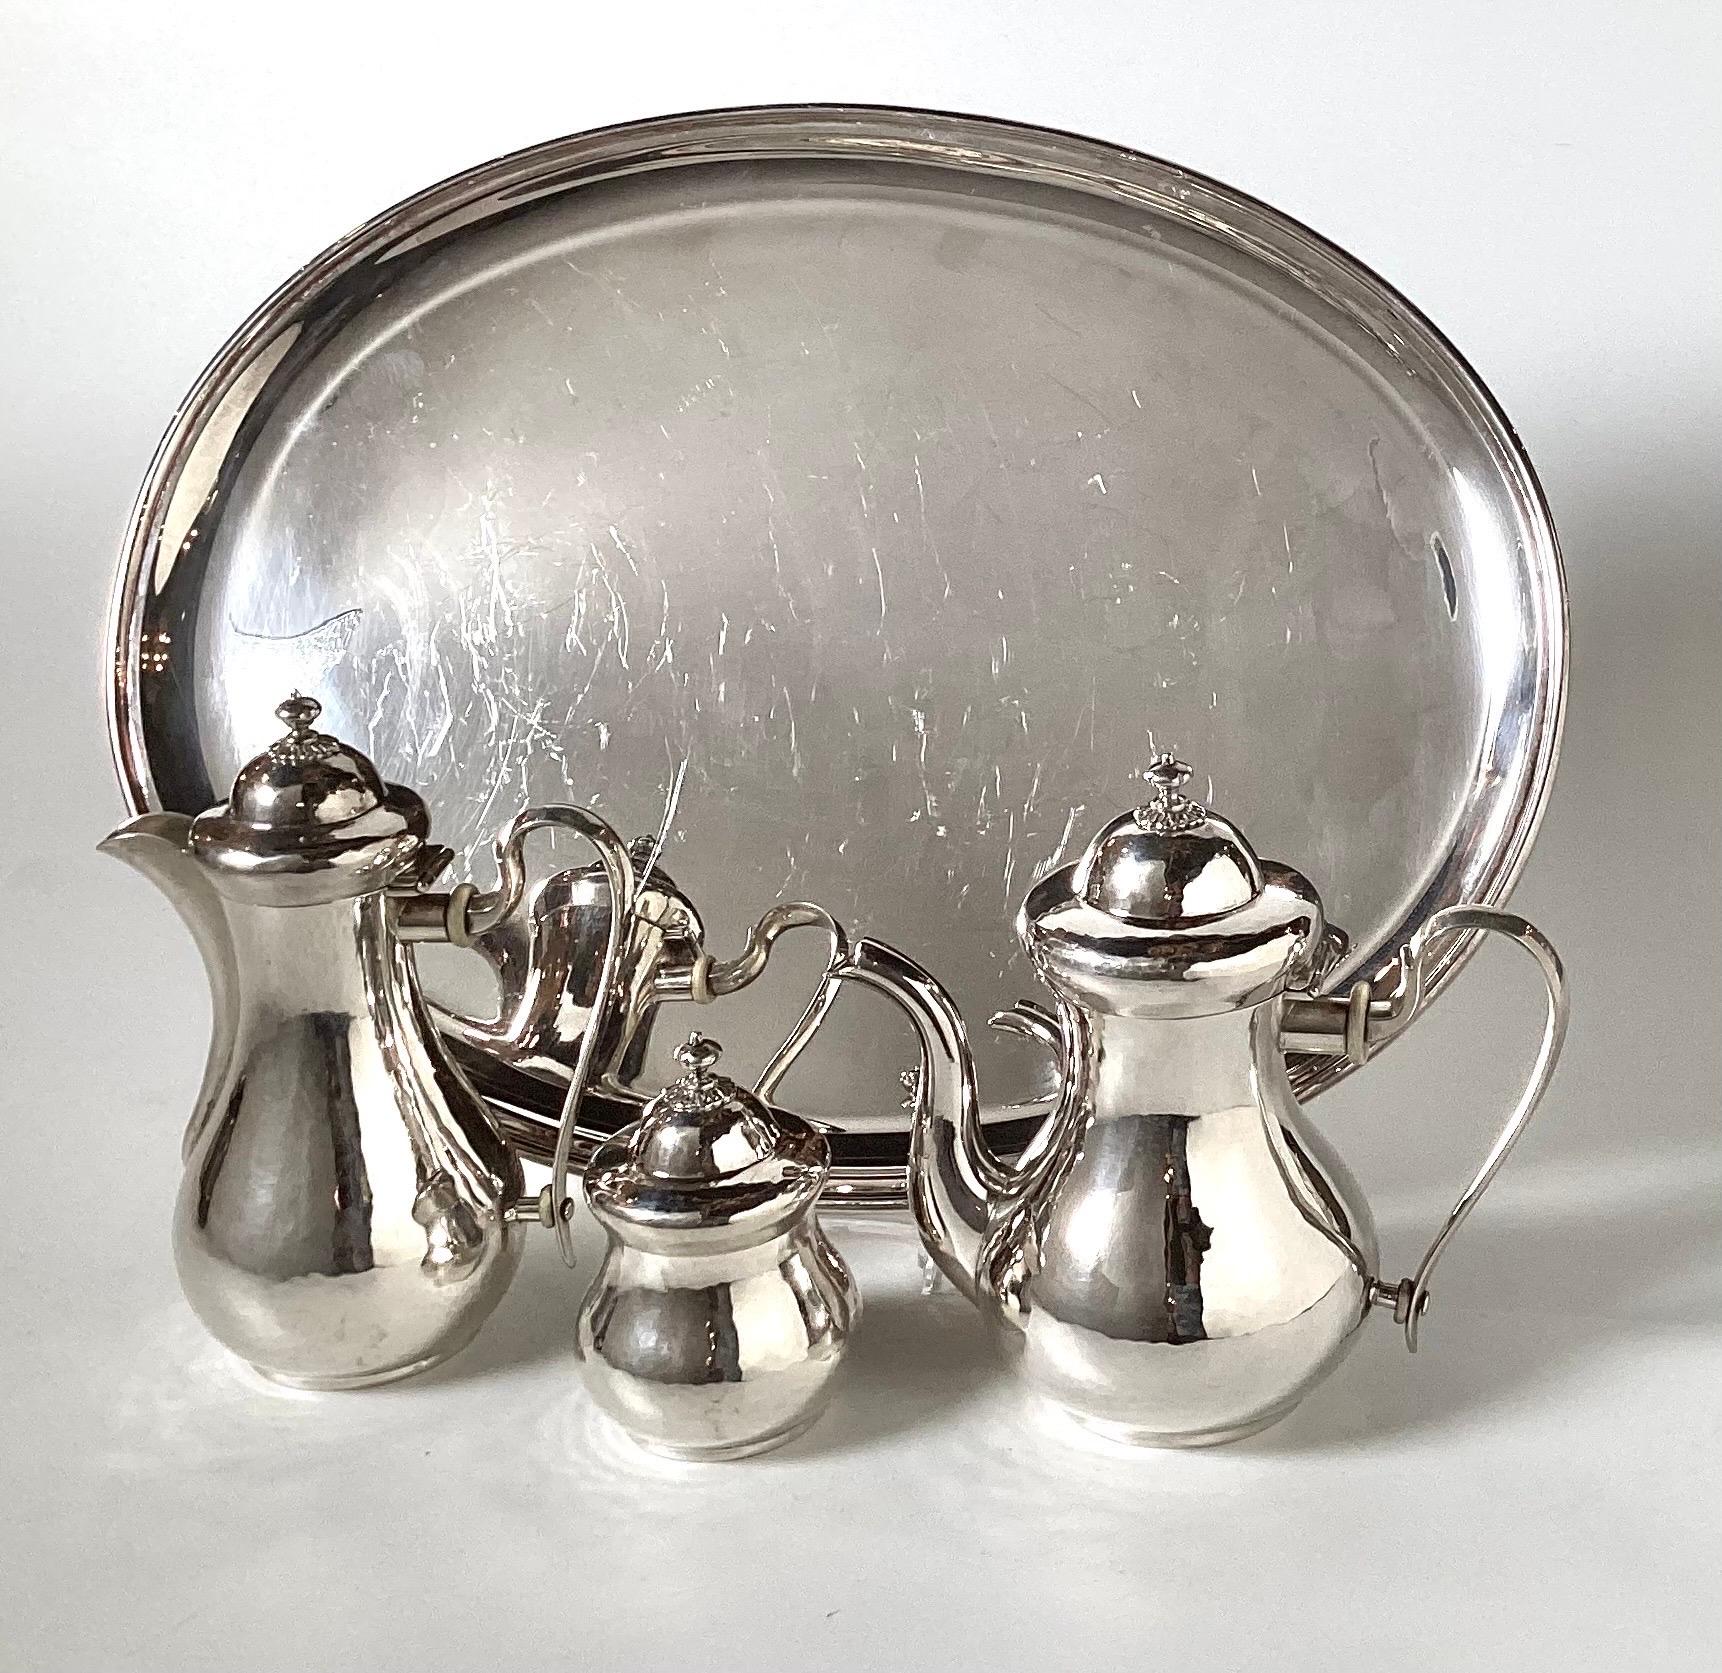 Very nice signed .800 silver coffee/ tea set by Mario Buccellati
Tray is 16